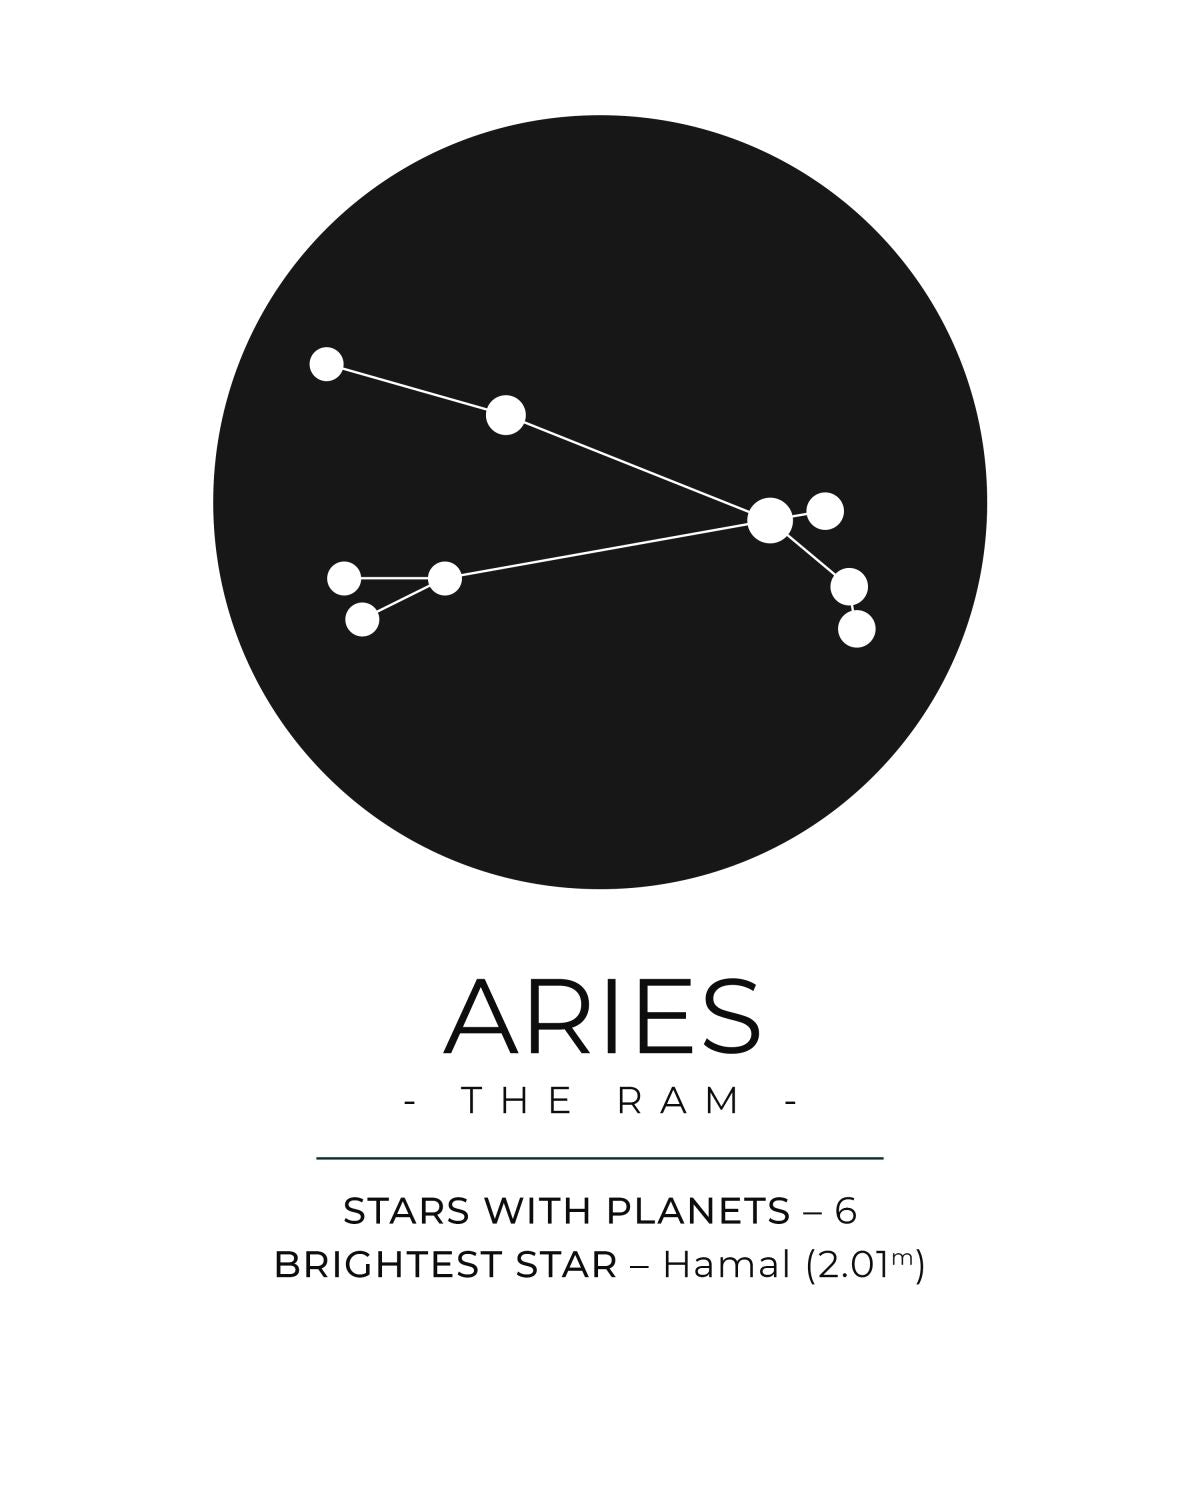 The Aries Constellation